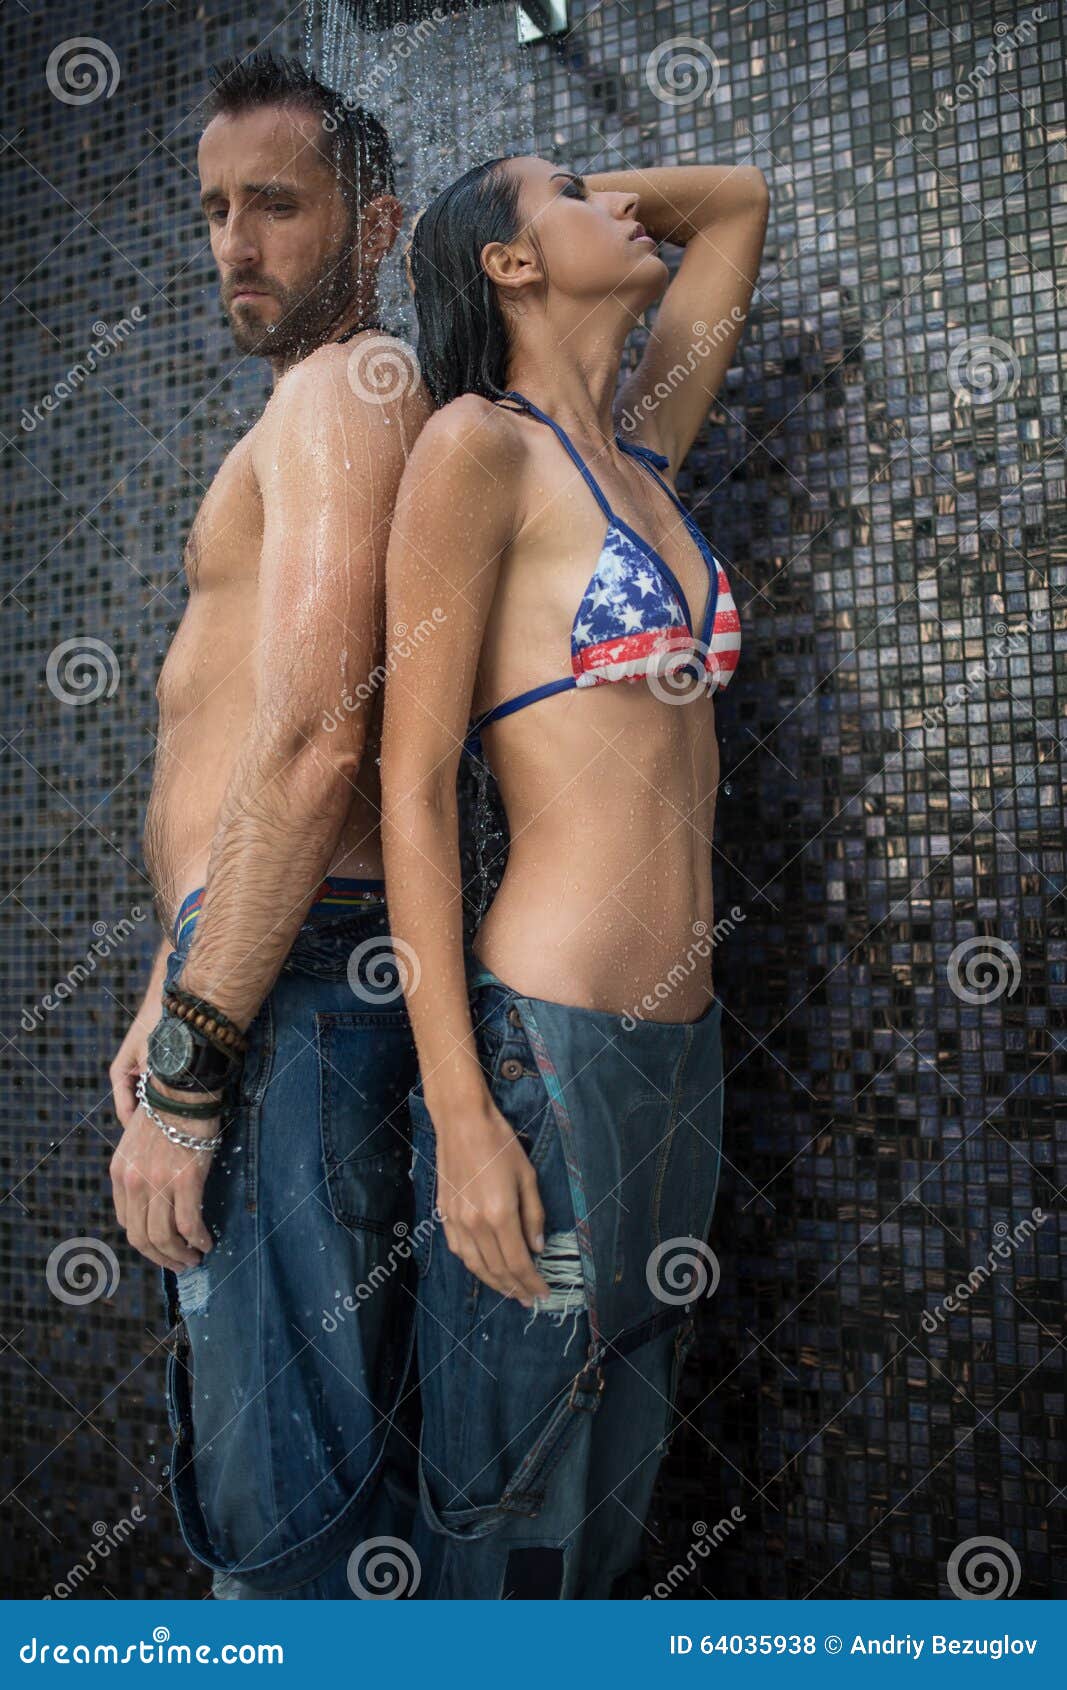 charles sturms add photo wet jeans in the shower